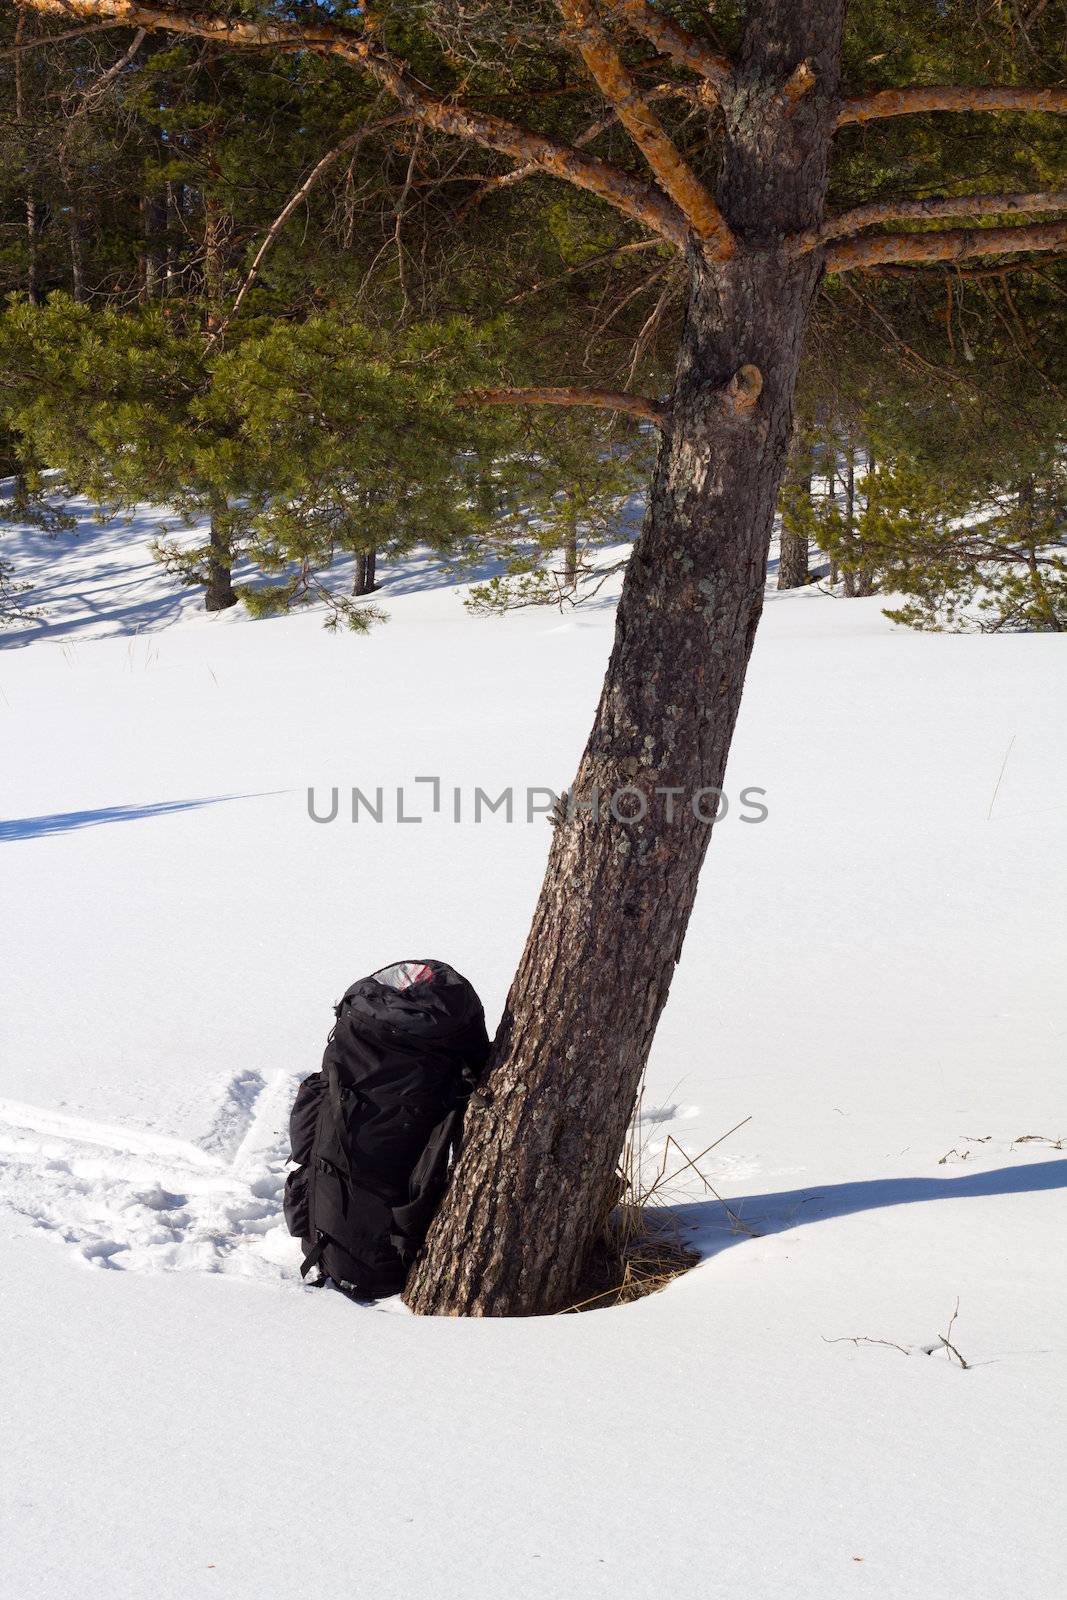 campaign backpacks in the winter wood